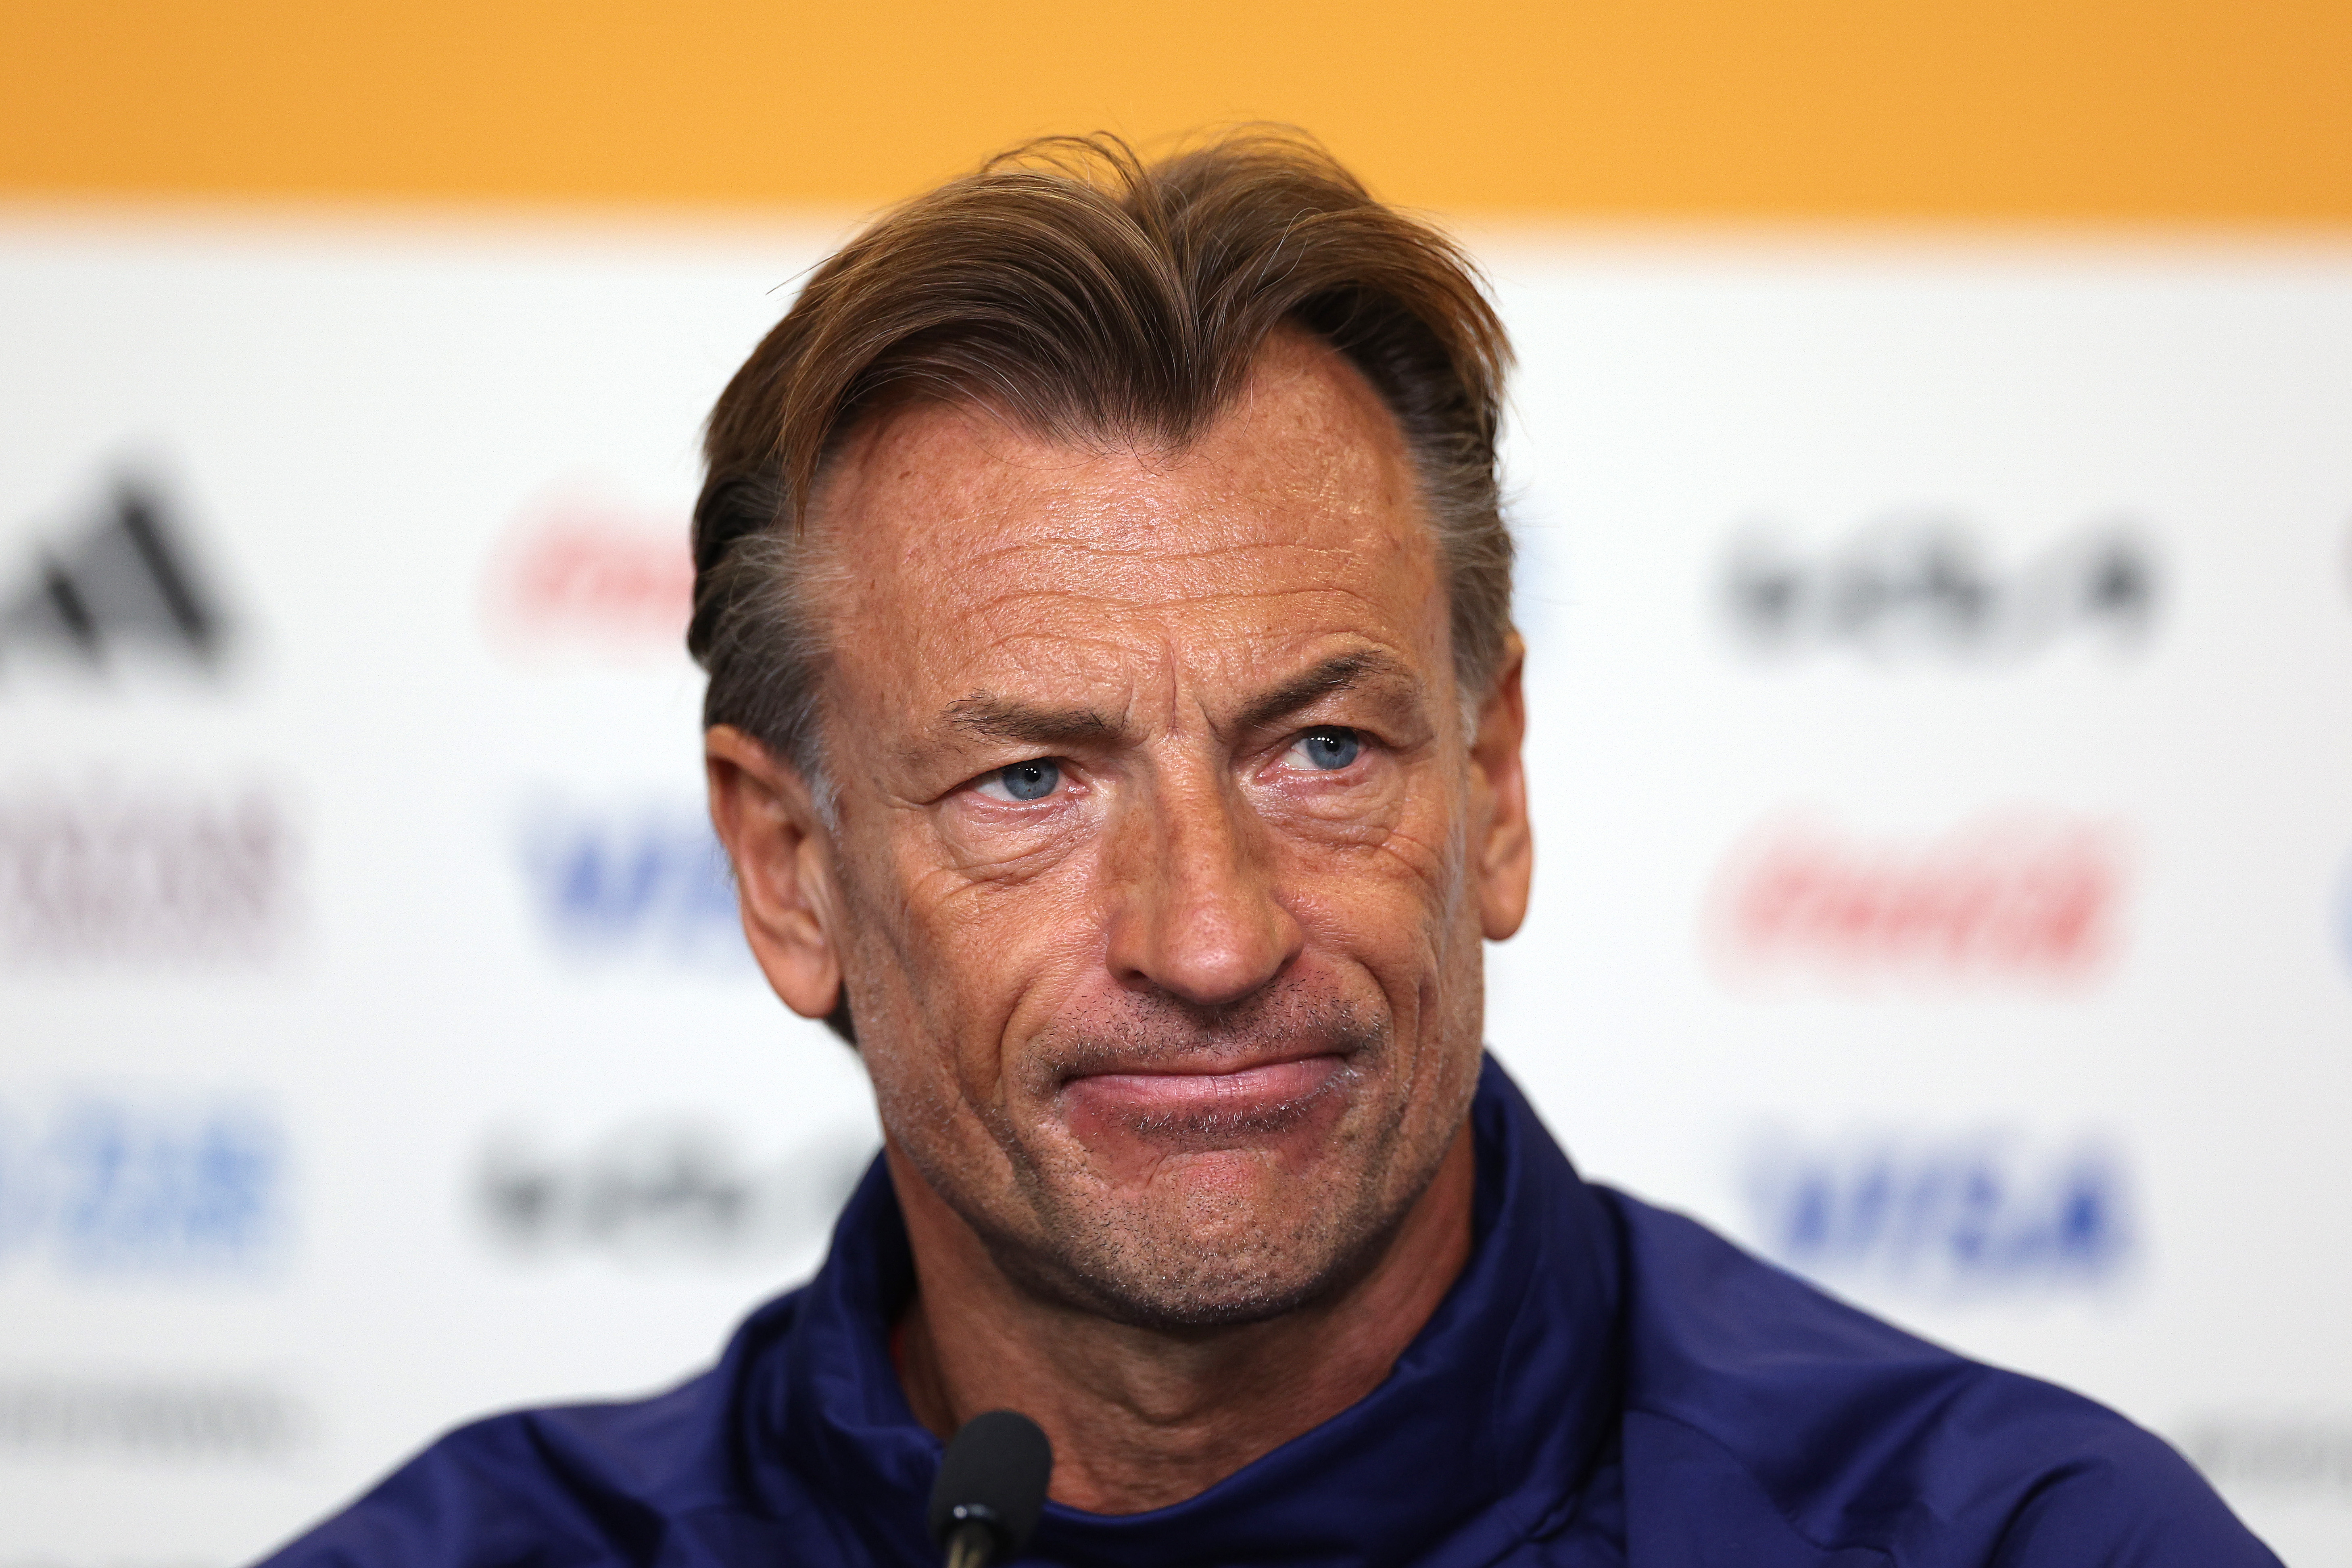 17) Fate chose, says France coach Hervé Renard after his team crashes out  of World Cup